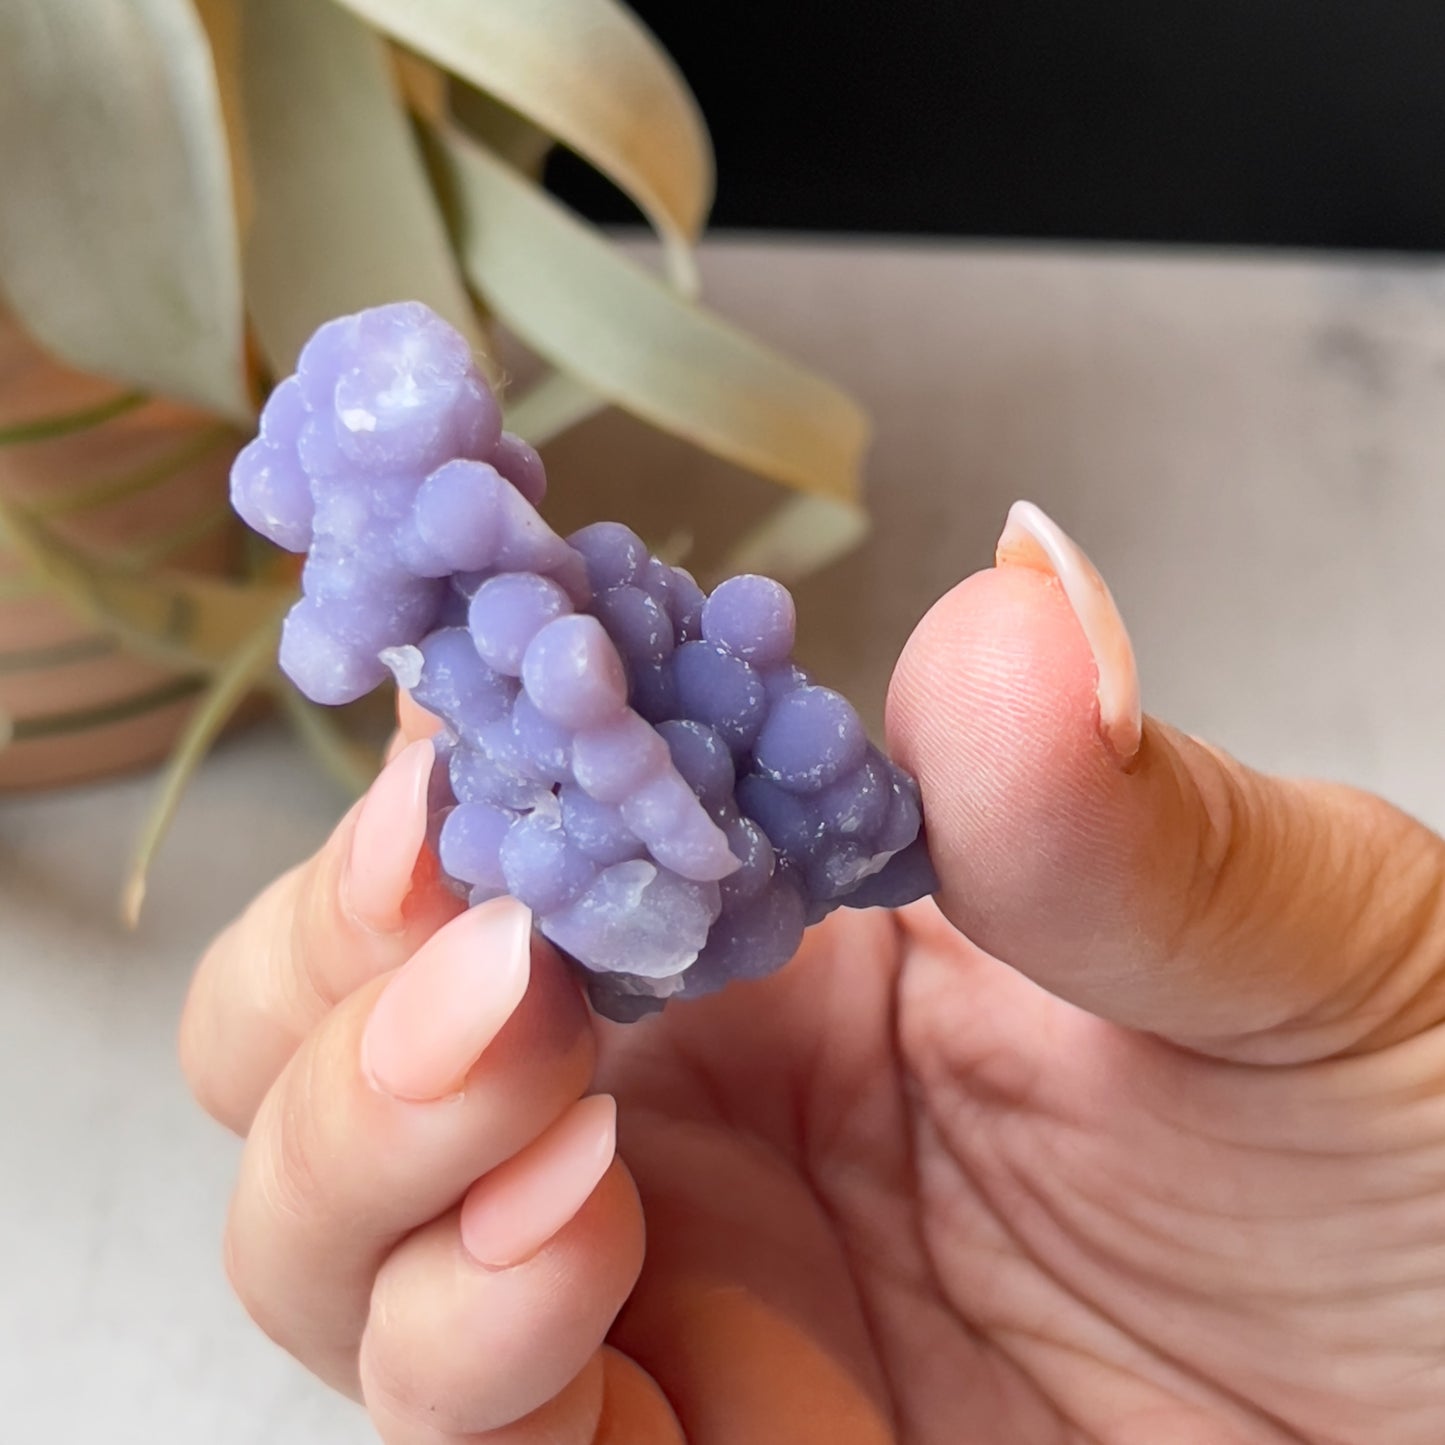 Sparkly Grape Agate Cluster with Druzy | Purple Botryoidal Chalcedony Crystal Specimen